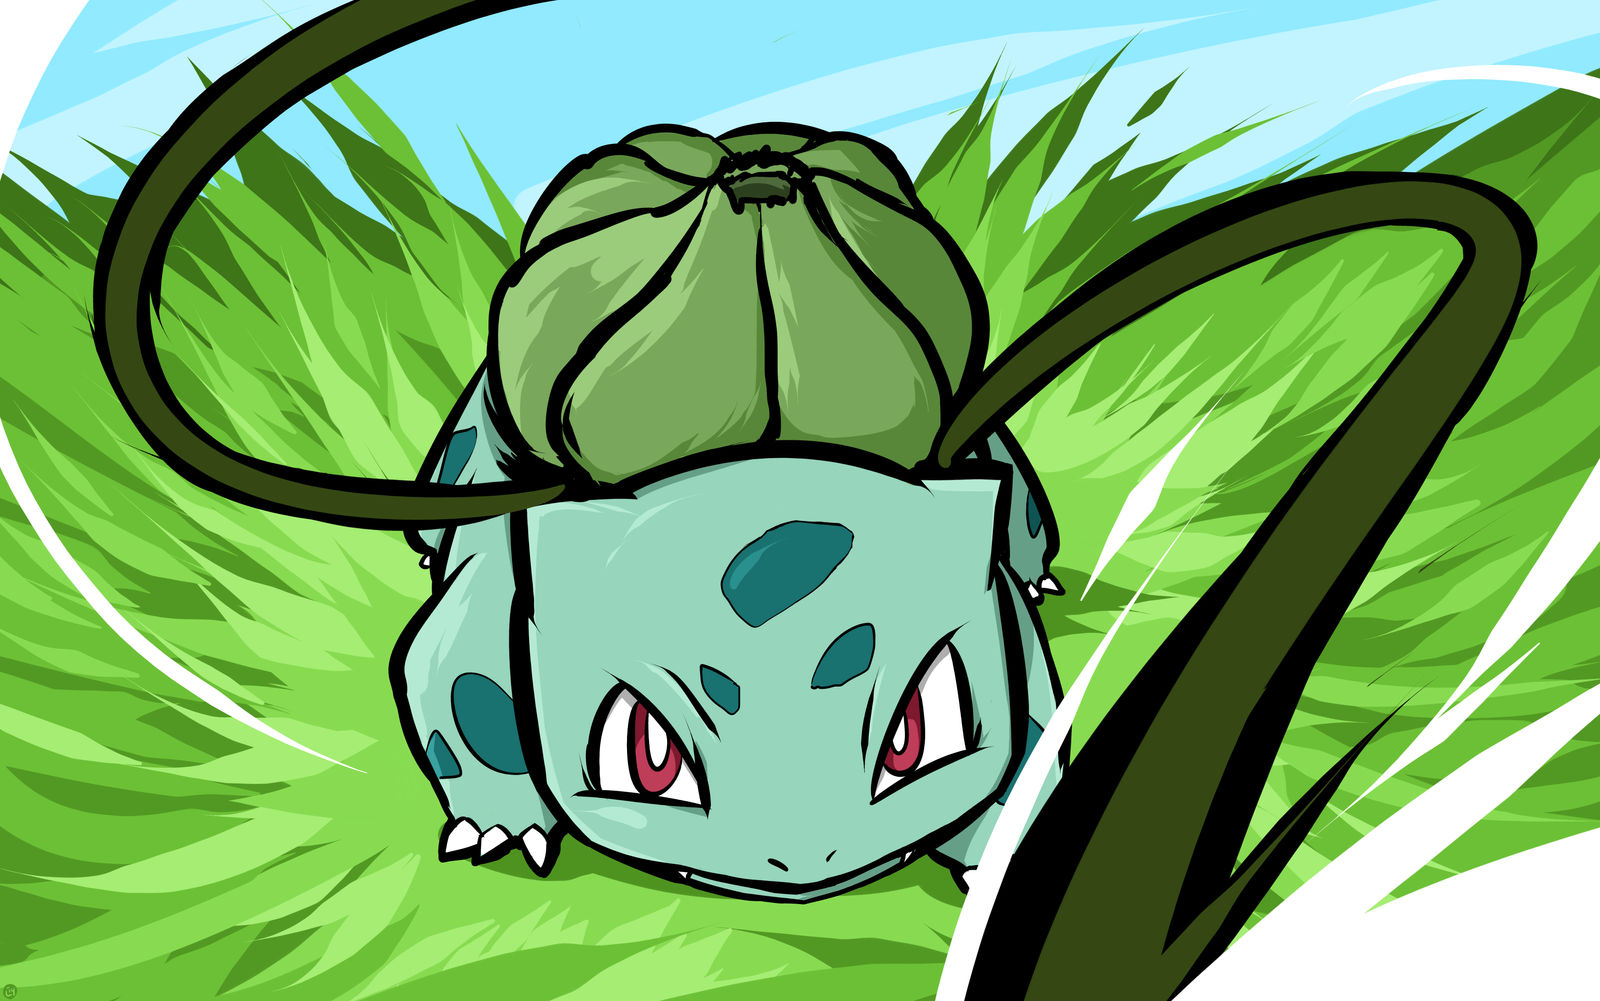 Bulbasaur' -Love Me [Pokemon] by the-universe-is-ours on DeviantArt